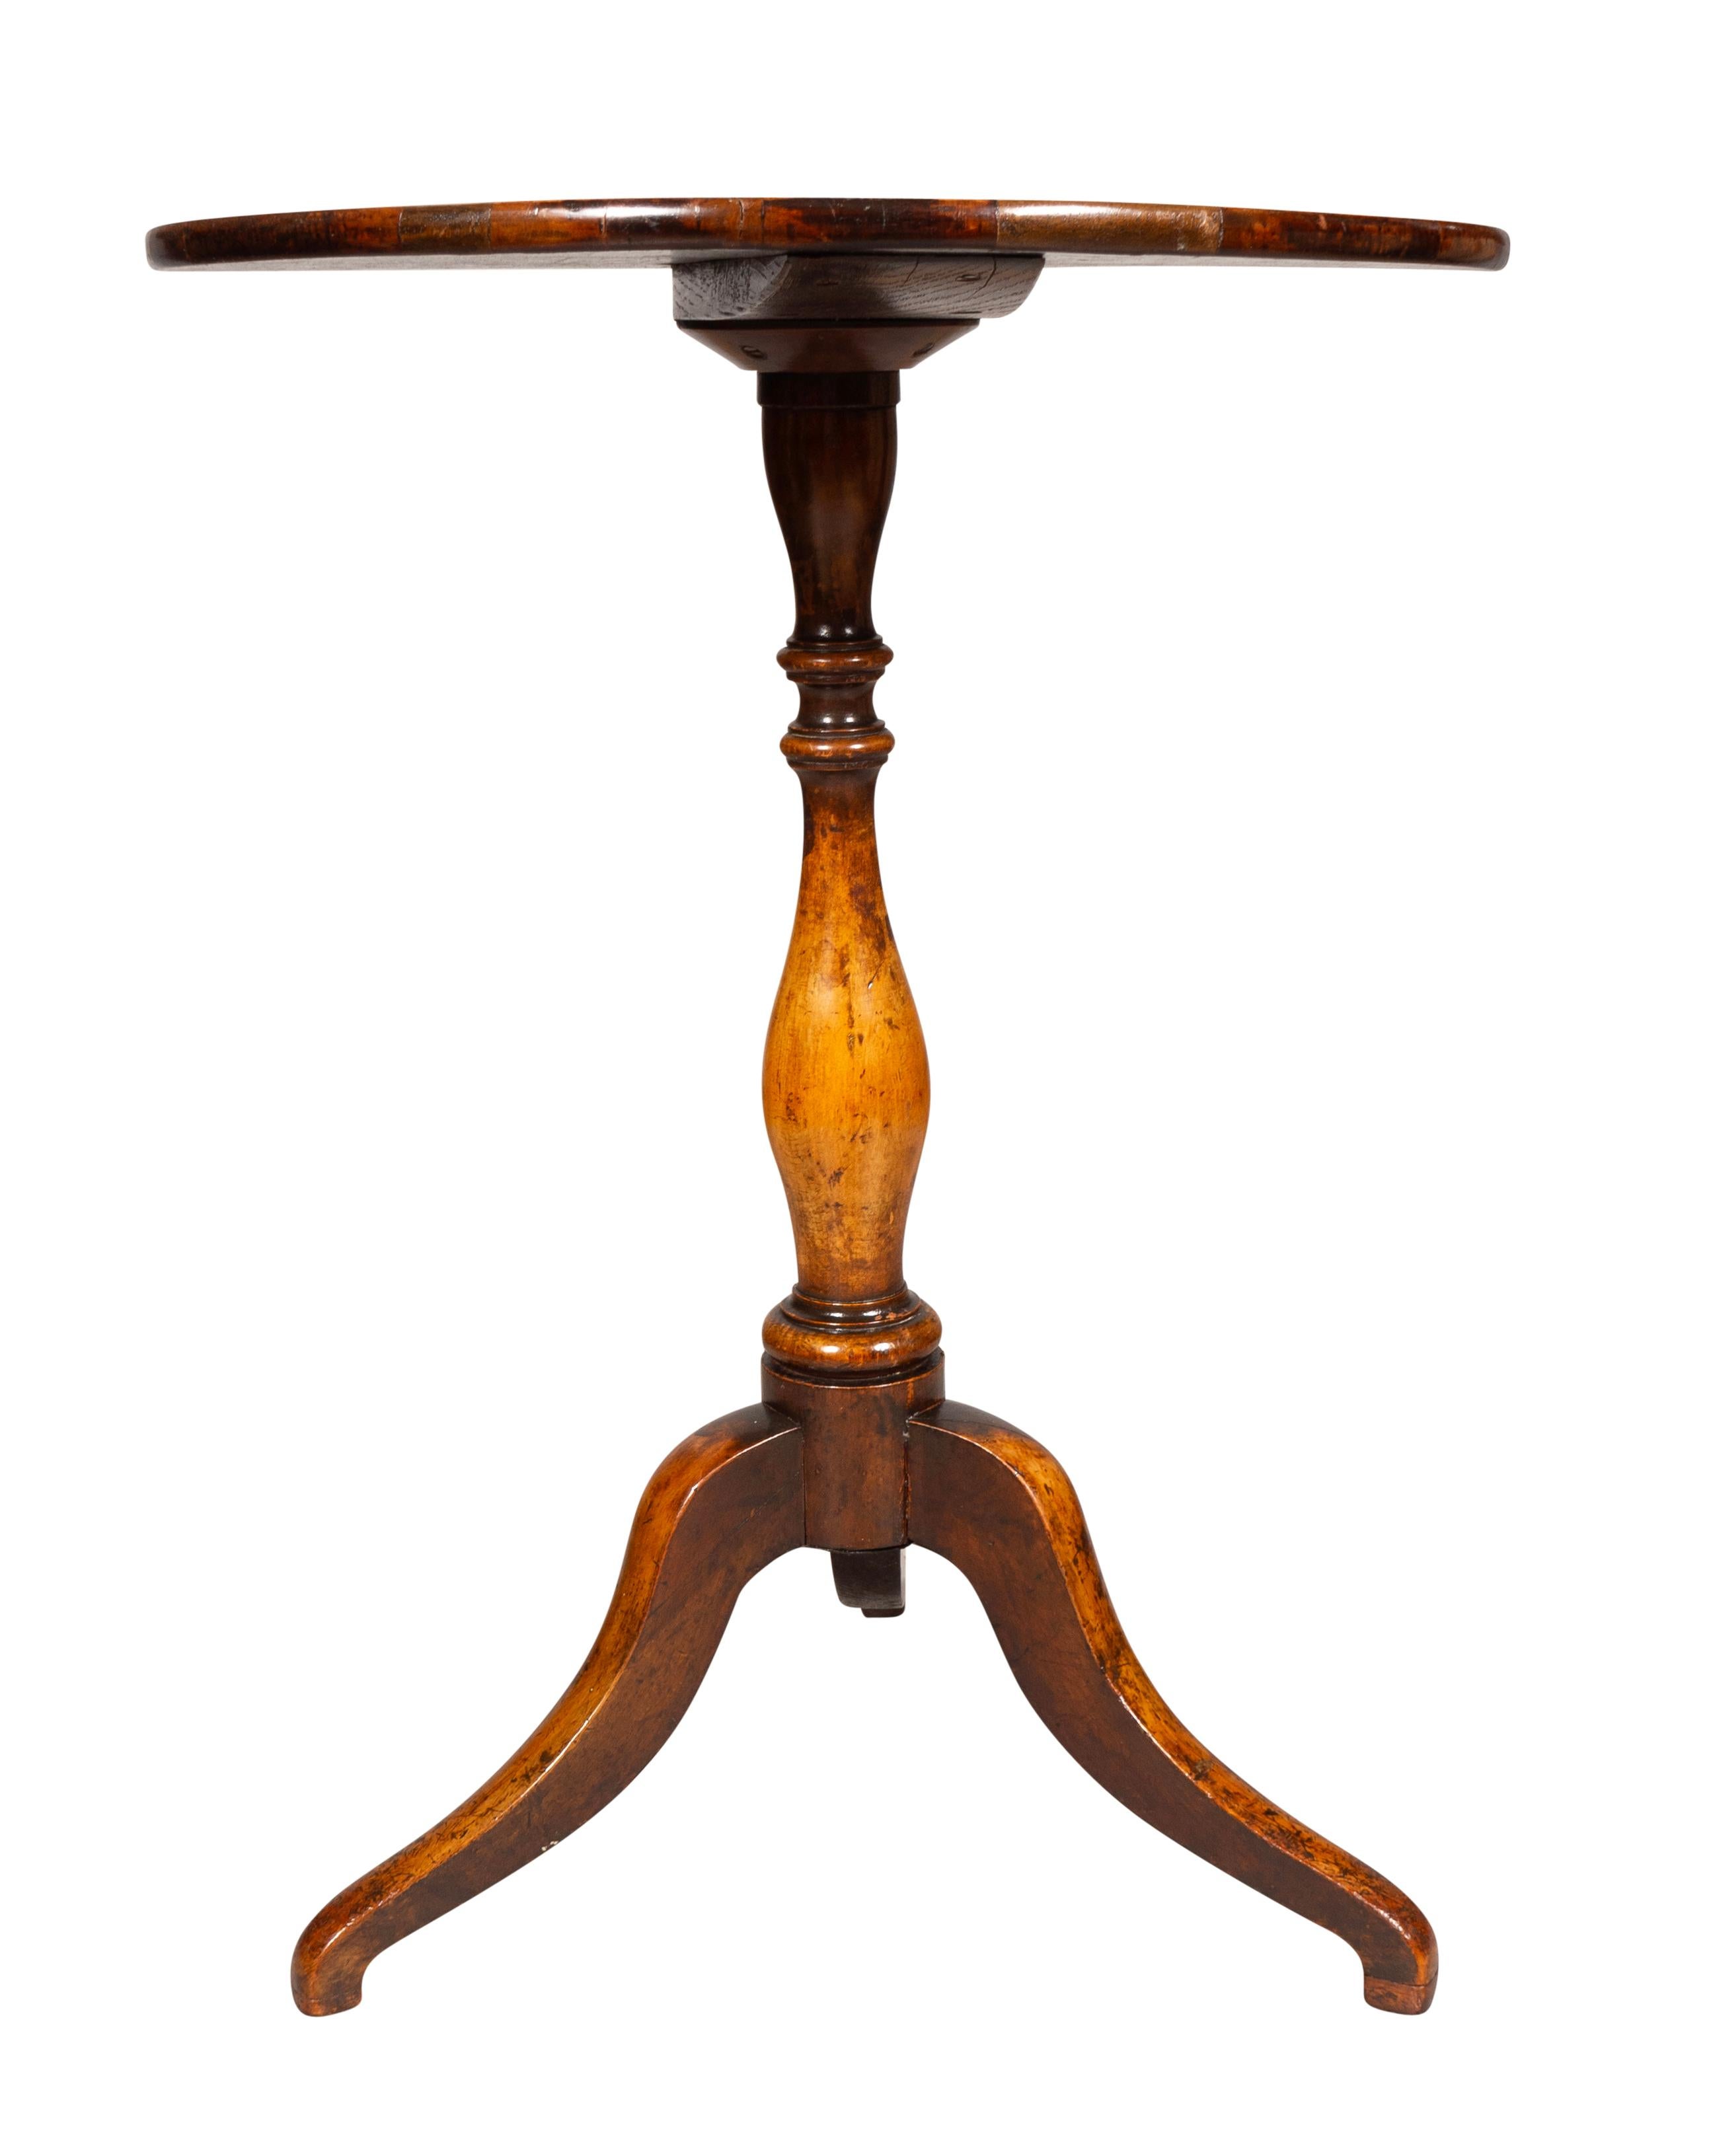 Circular fixed top with umbrella shaped inlay of exotic woods. Turned support with tripod splayed legs.